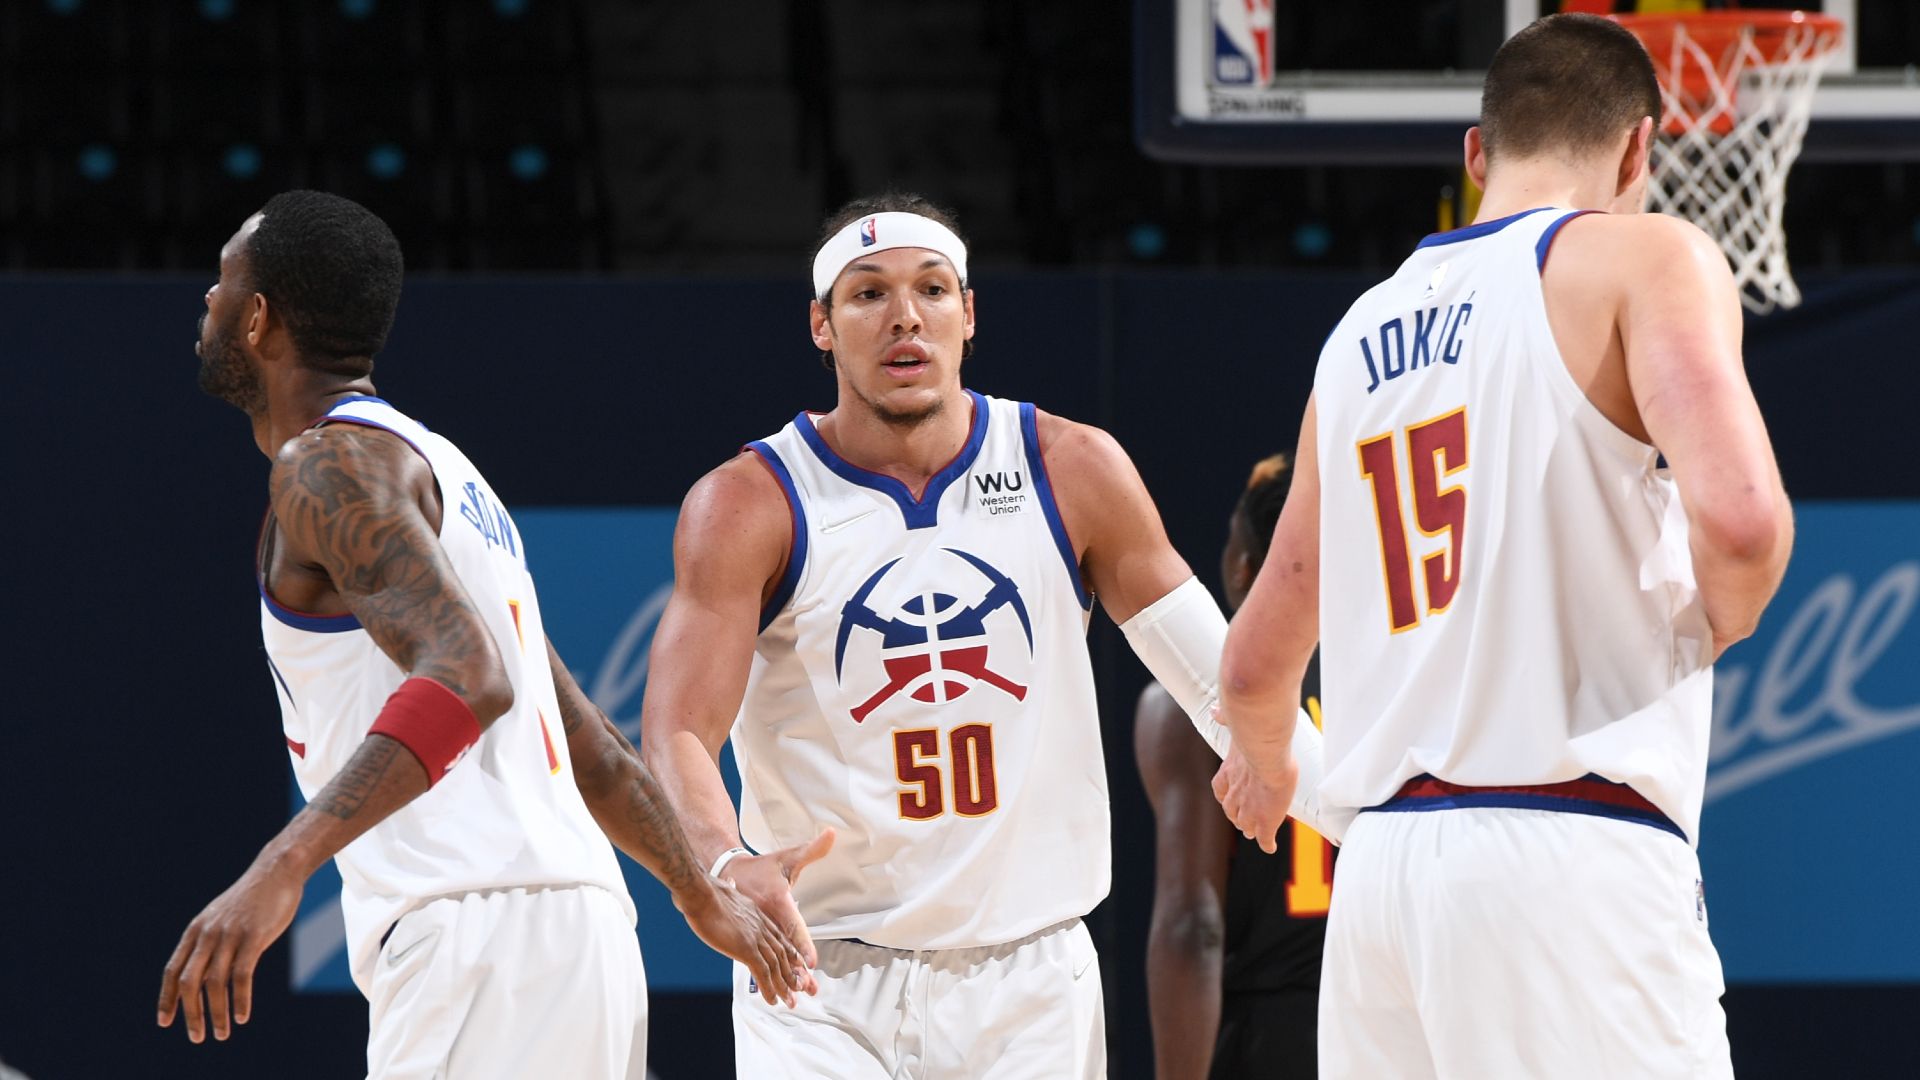 Denver Nuggets Showed Off The Atlanta Hawks With An Outstanding Debut By Aaron Gordon. NBA.com Argentina. Football24 News English